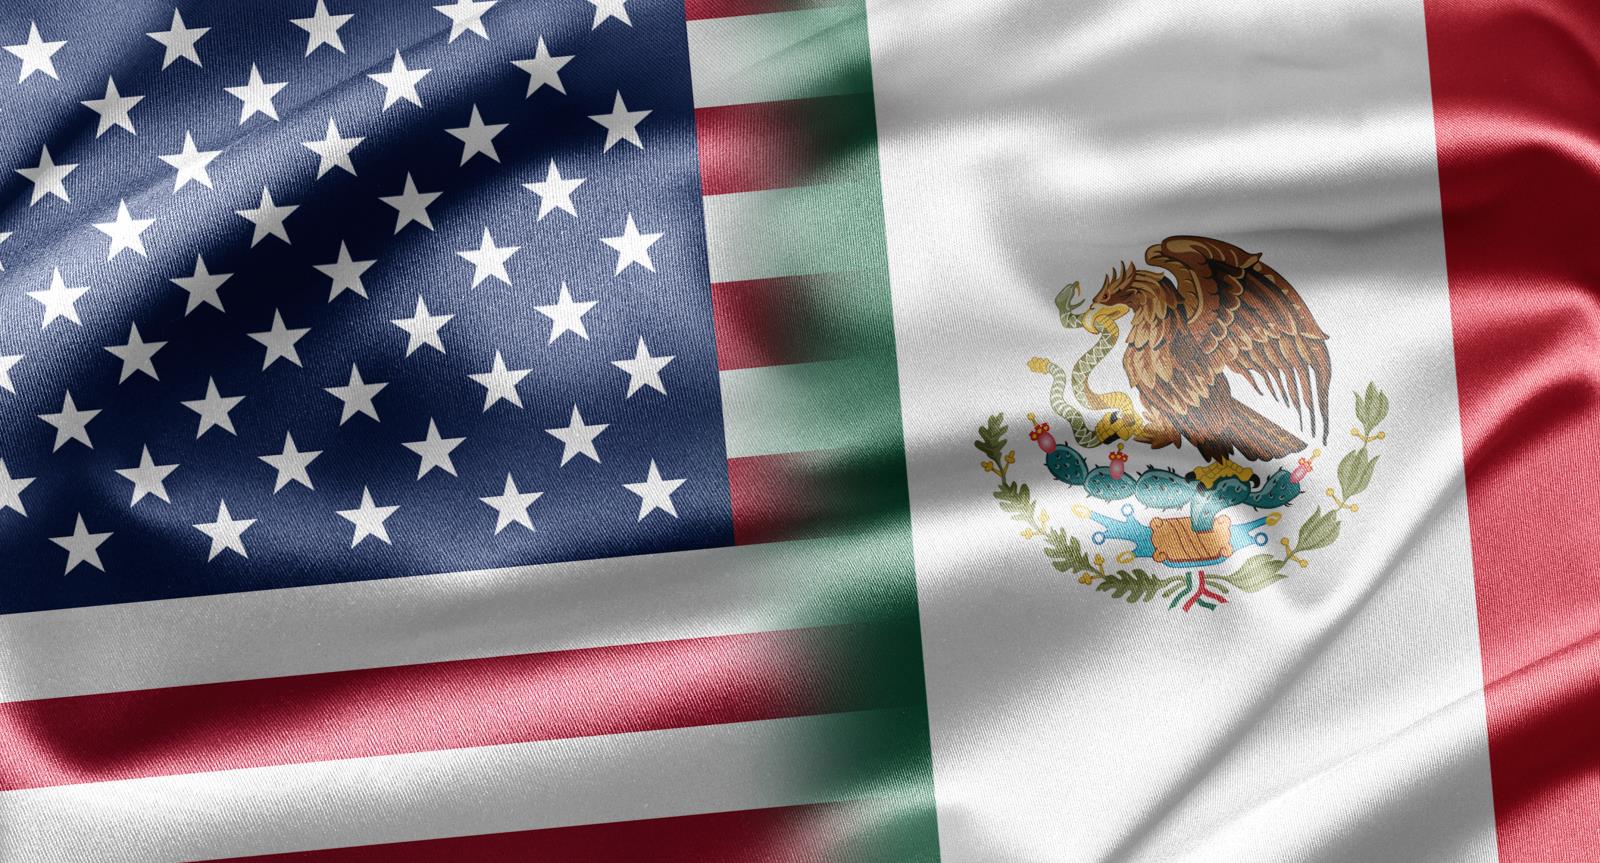 Groups representing U.S. potato growers have sent a letter to the U.S. agriculture secretary and trade representative asking them to adopt a “trust but verify” stance when it comes to negotiations with Mexico on full market access for fresh U.S. potatoes.